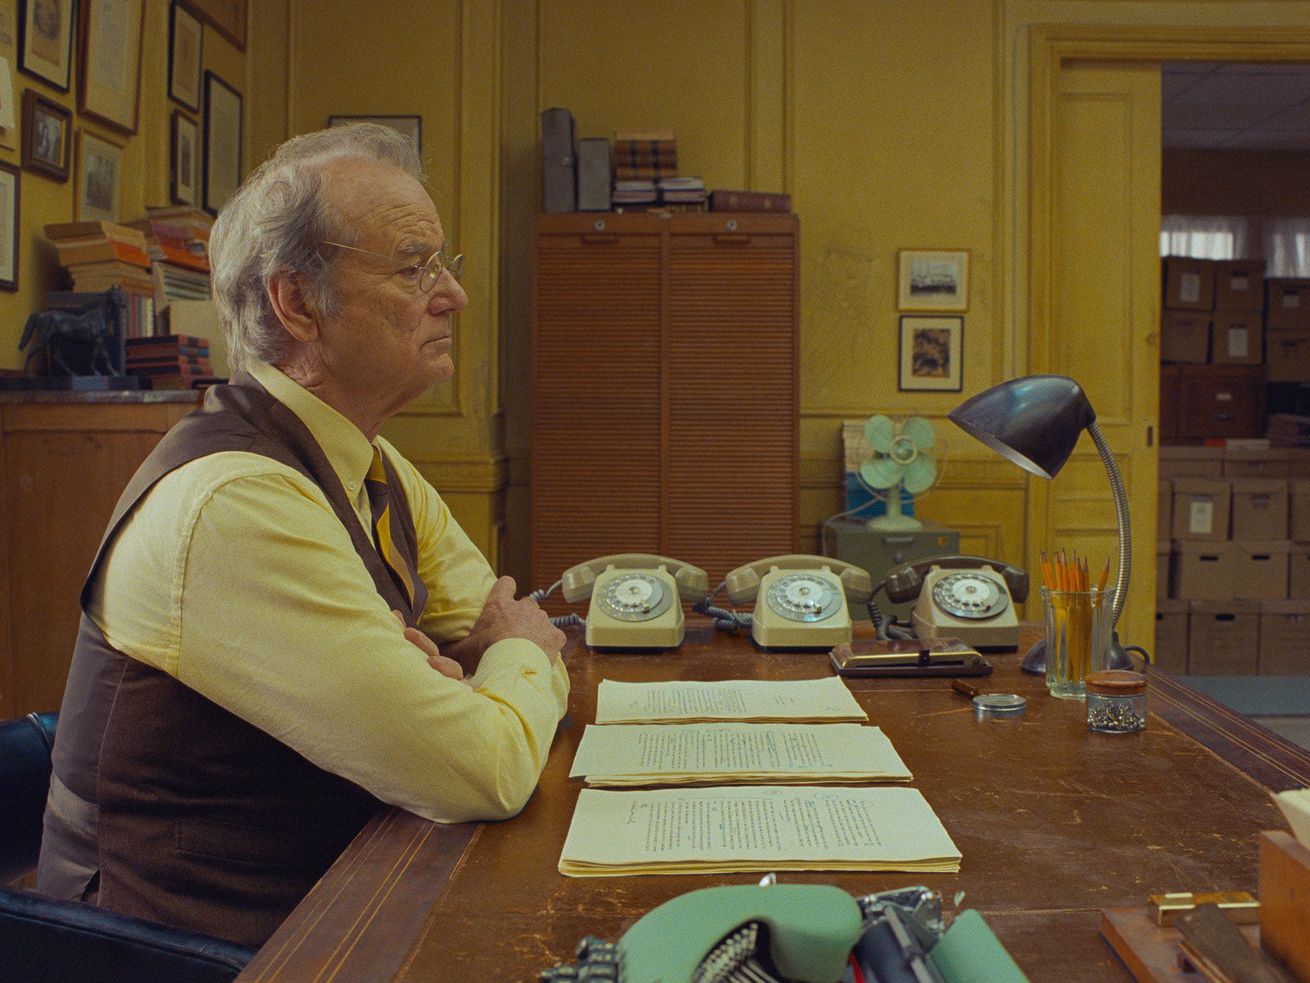 The French Dispatch is peak Wes Anderson. I wish I loved it.